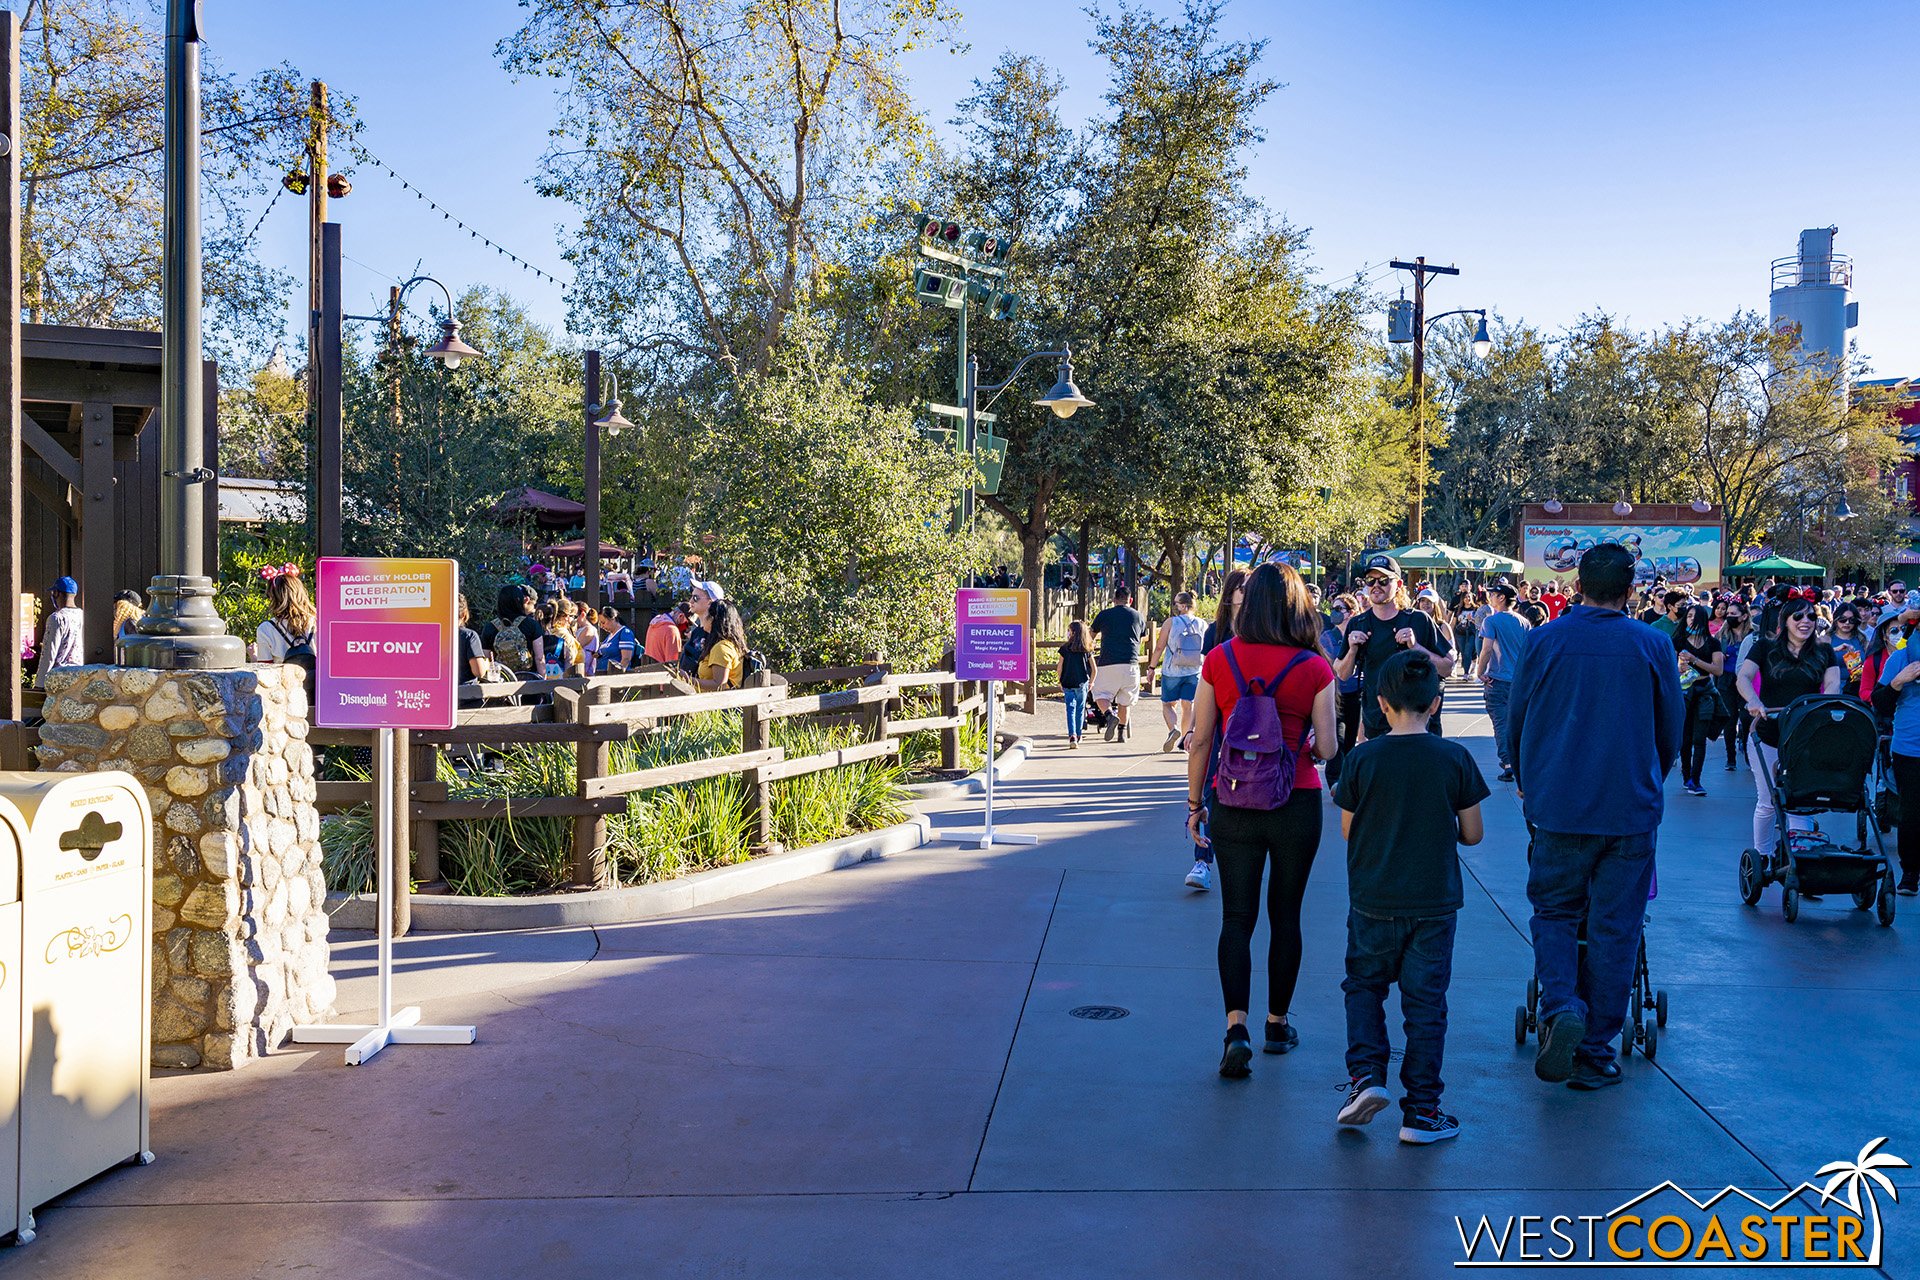  Looking to get your Magic Key special mini poster print?  Head over to just before the Cars Land entrance along the parade corridor and look left (if coming from the park entrance). 